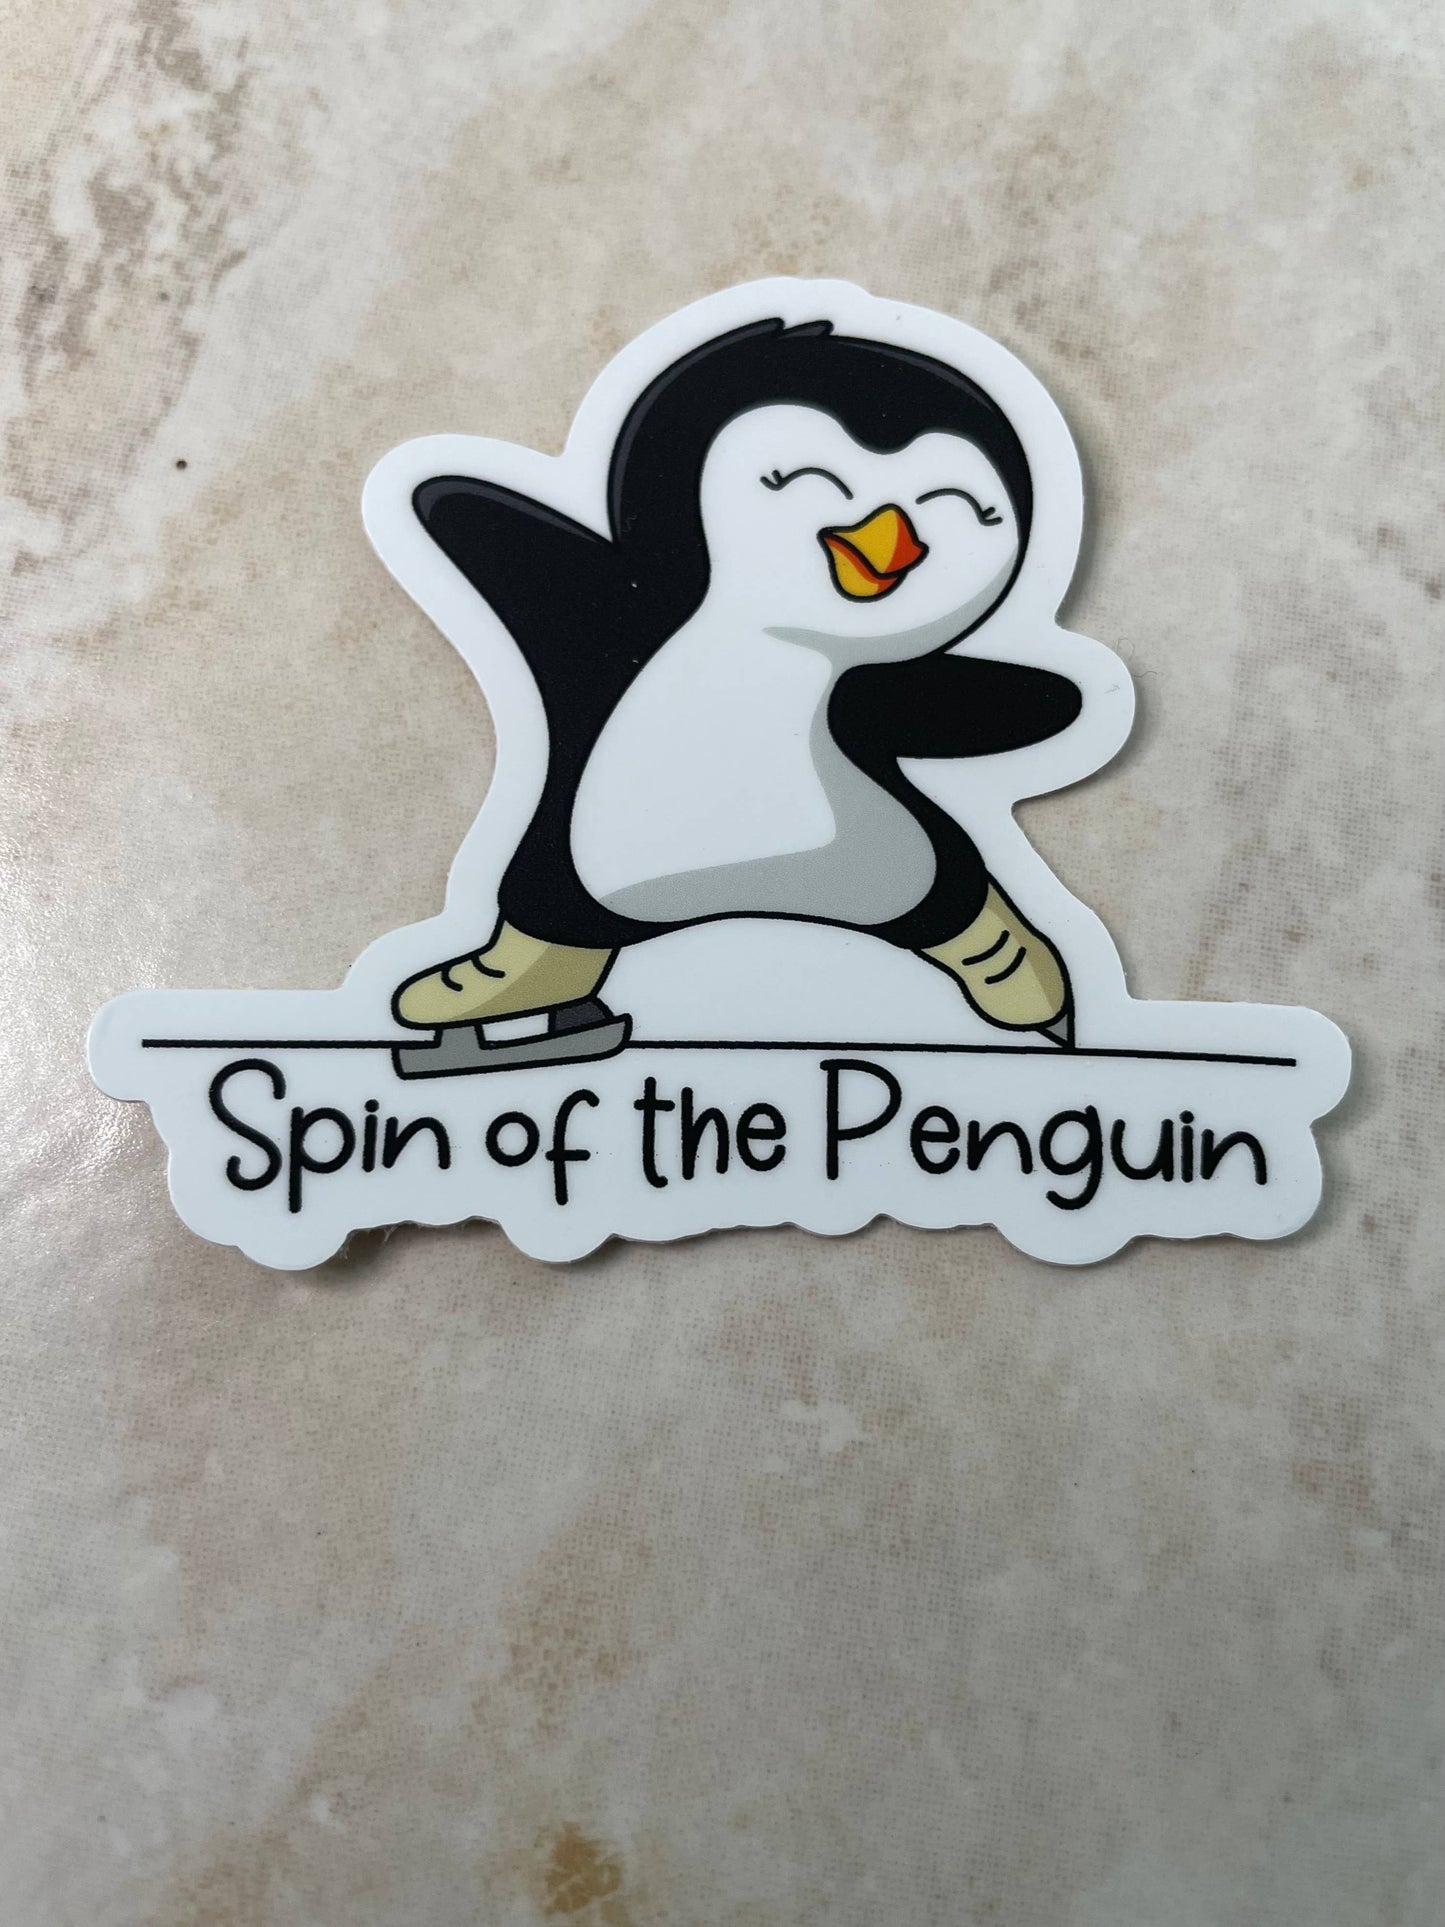 Spin of The Penguin Figure Skating Sticker, 3" x 2.7"